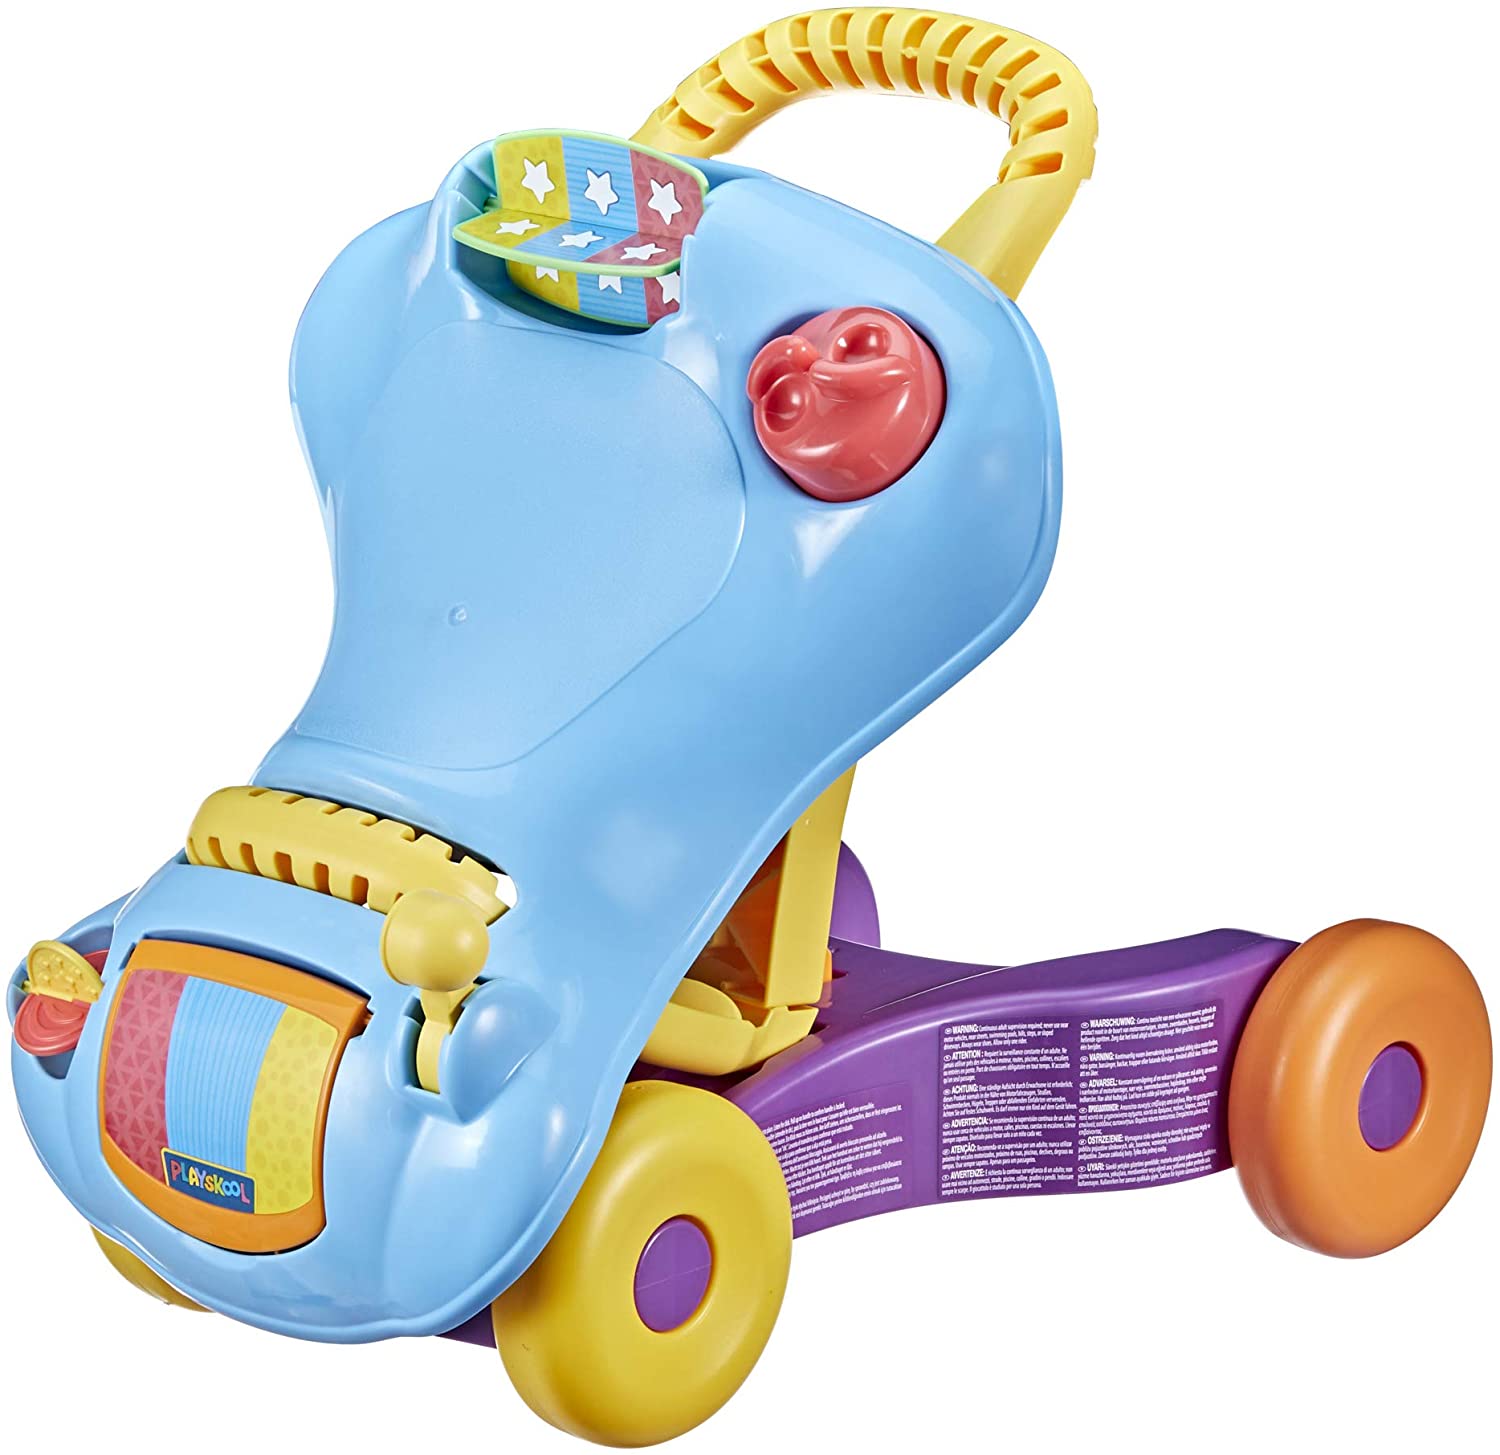 Playskool Step Start Walk 'n Ride Active 2-in-1 Ride-On & Walker Toy $15.25 + Free Shipping w/ Amazon Prime or Orders $25+